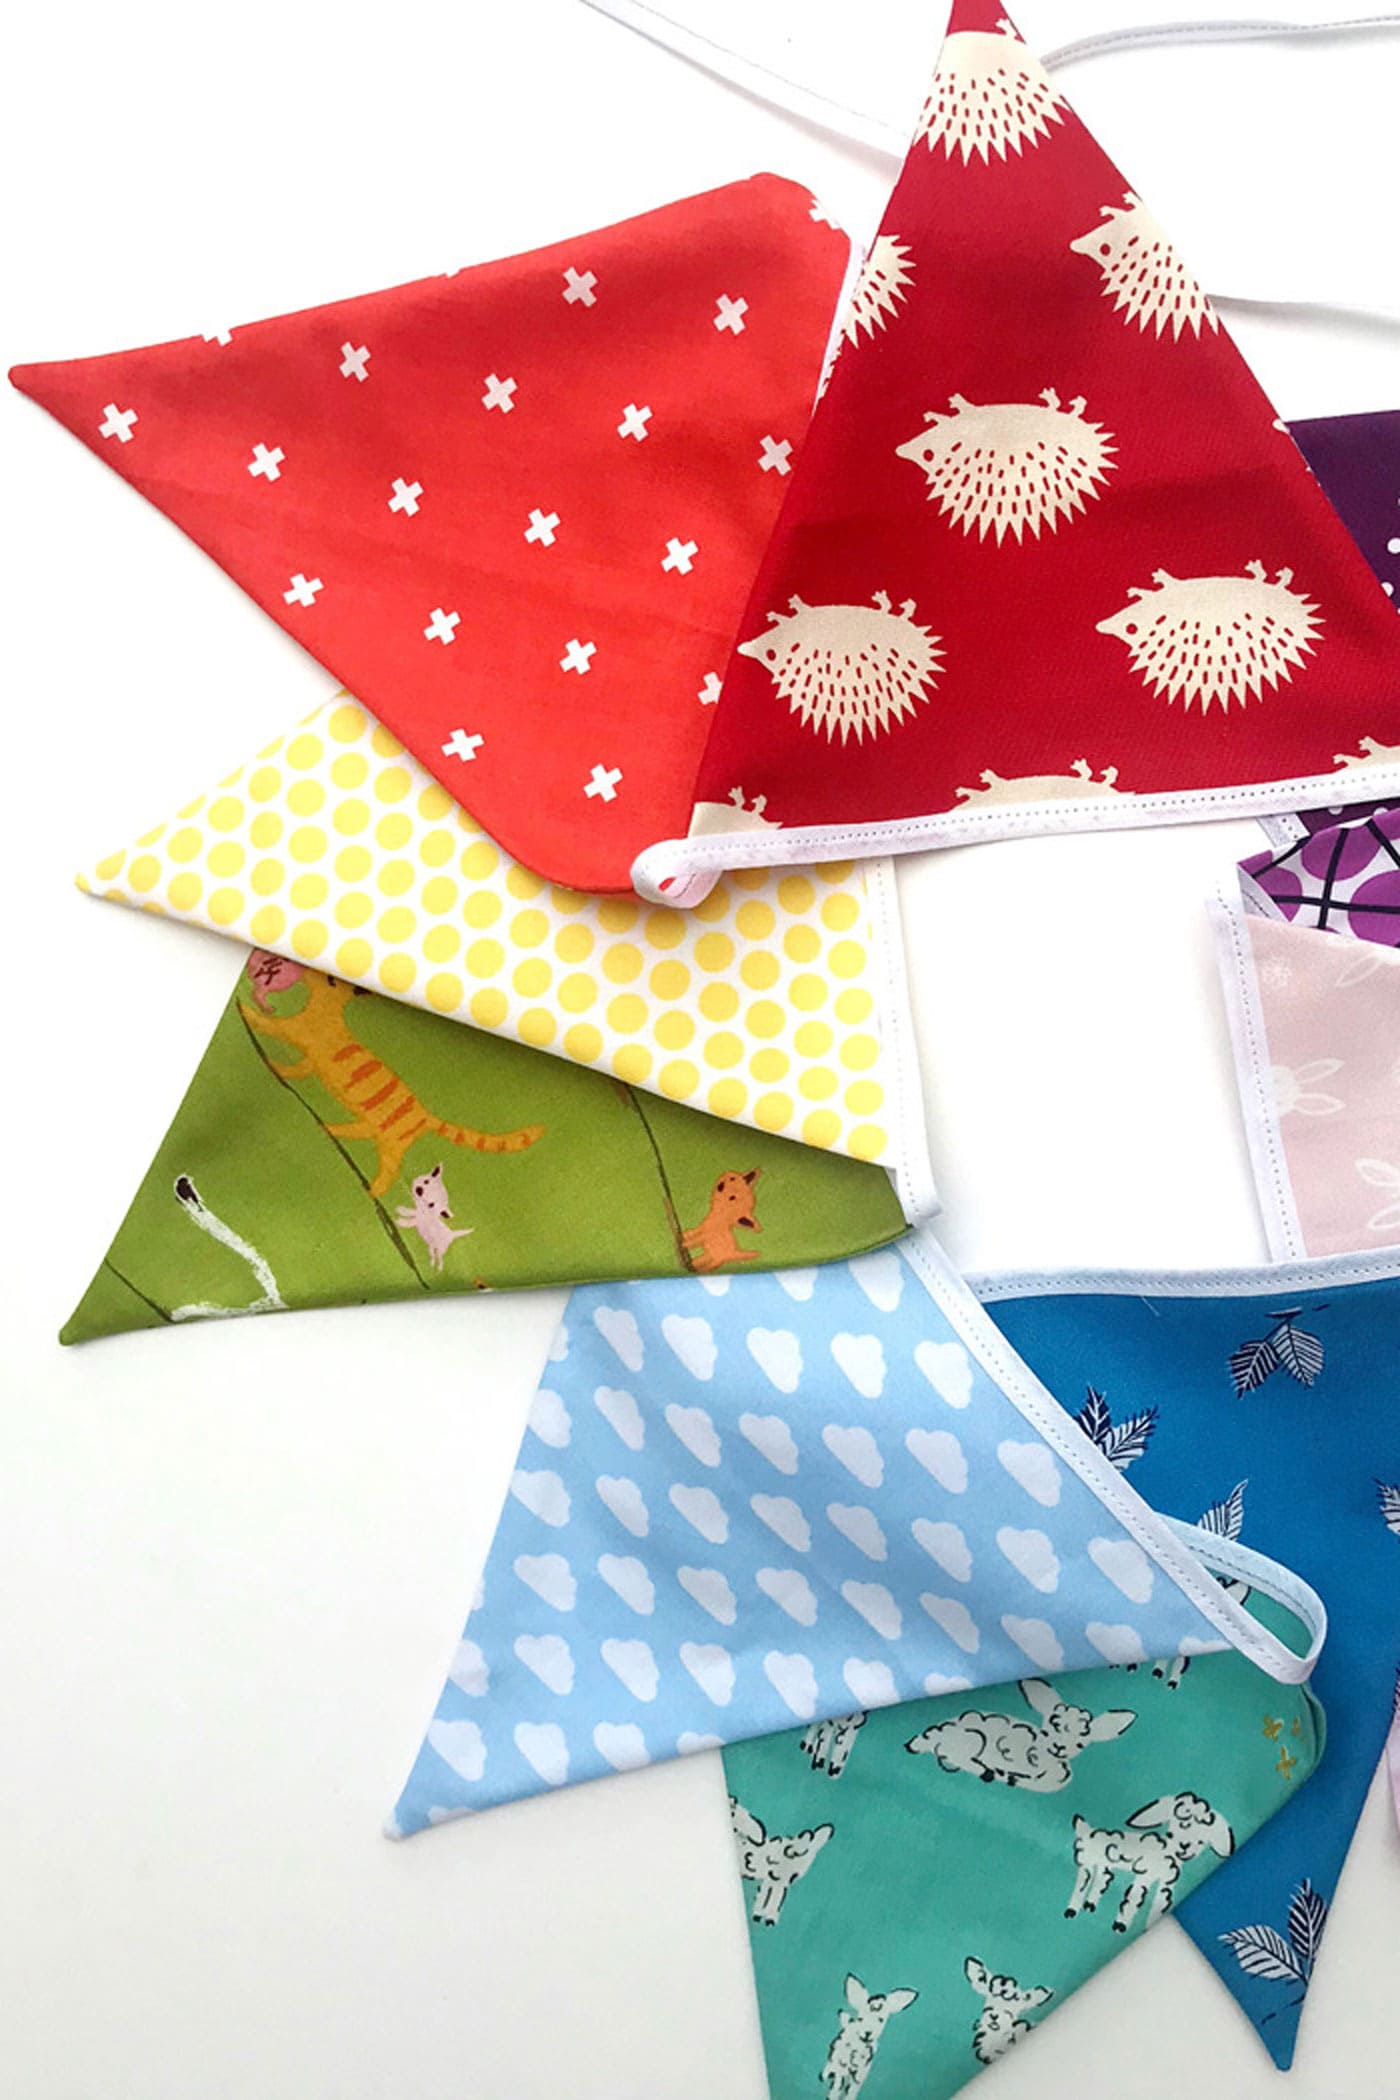 How to Make a Fabric Bunting with Free Template